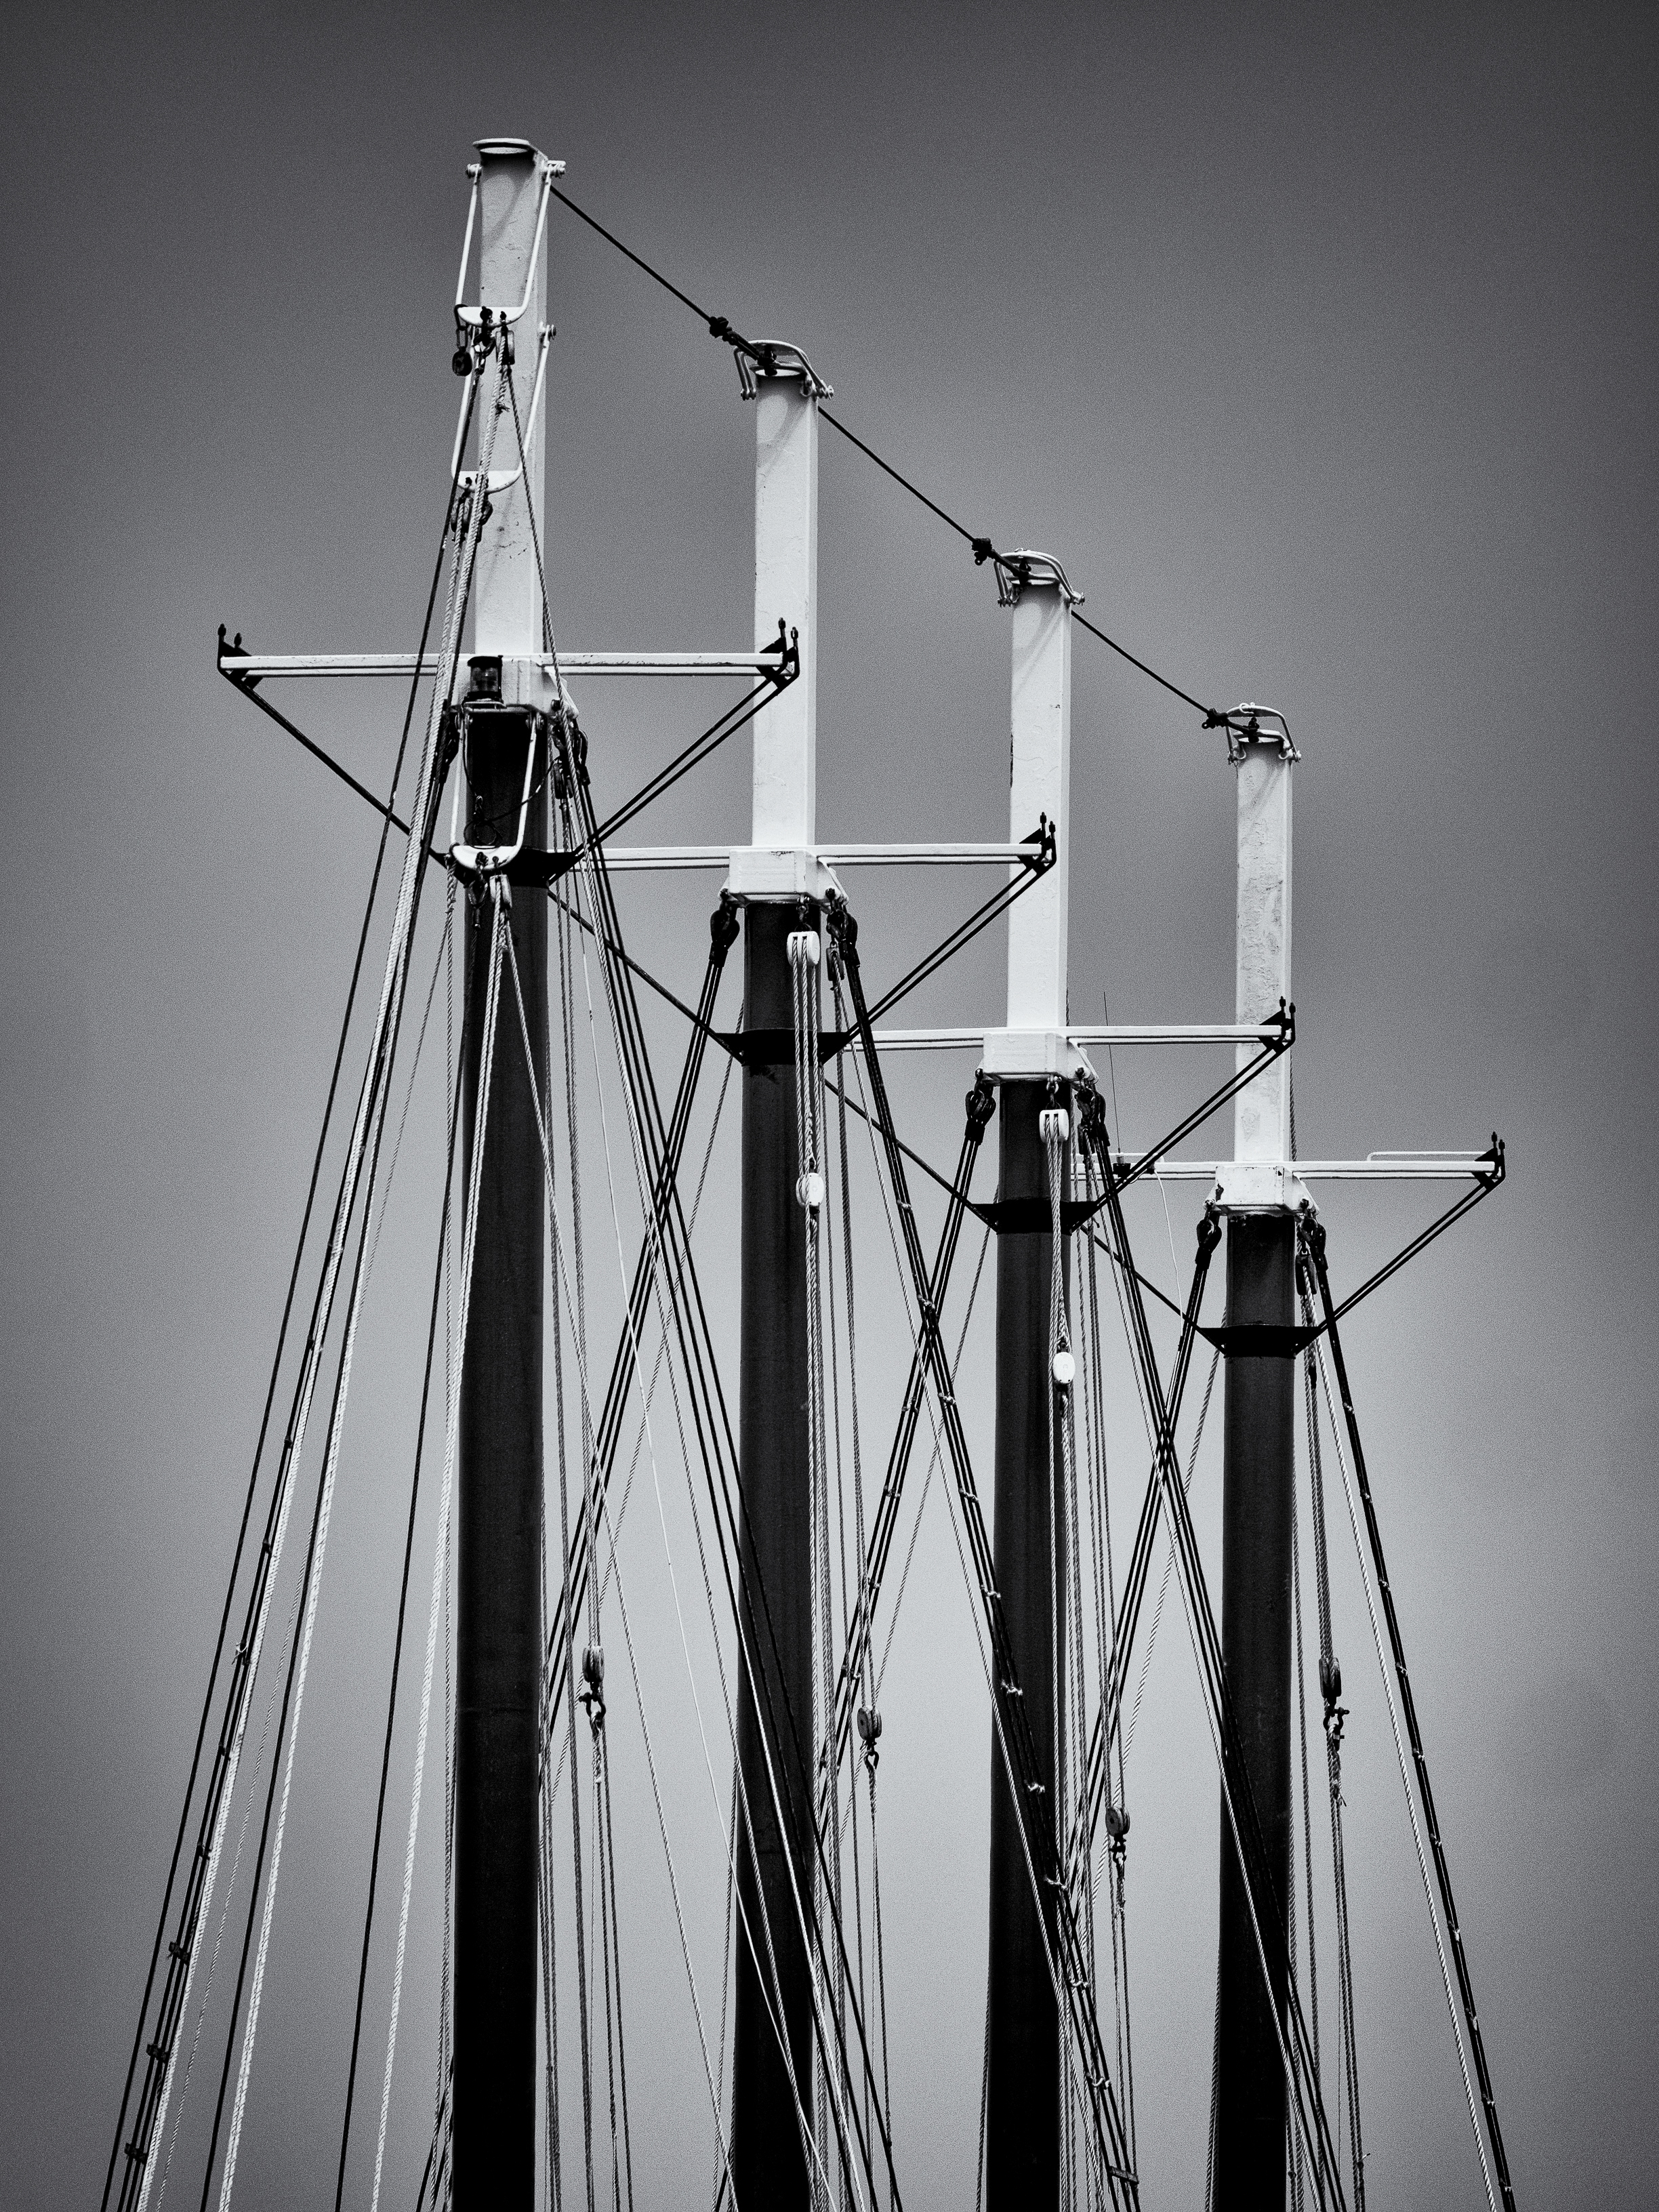 Masts of the Margret Todd